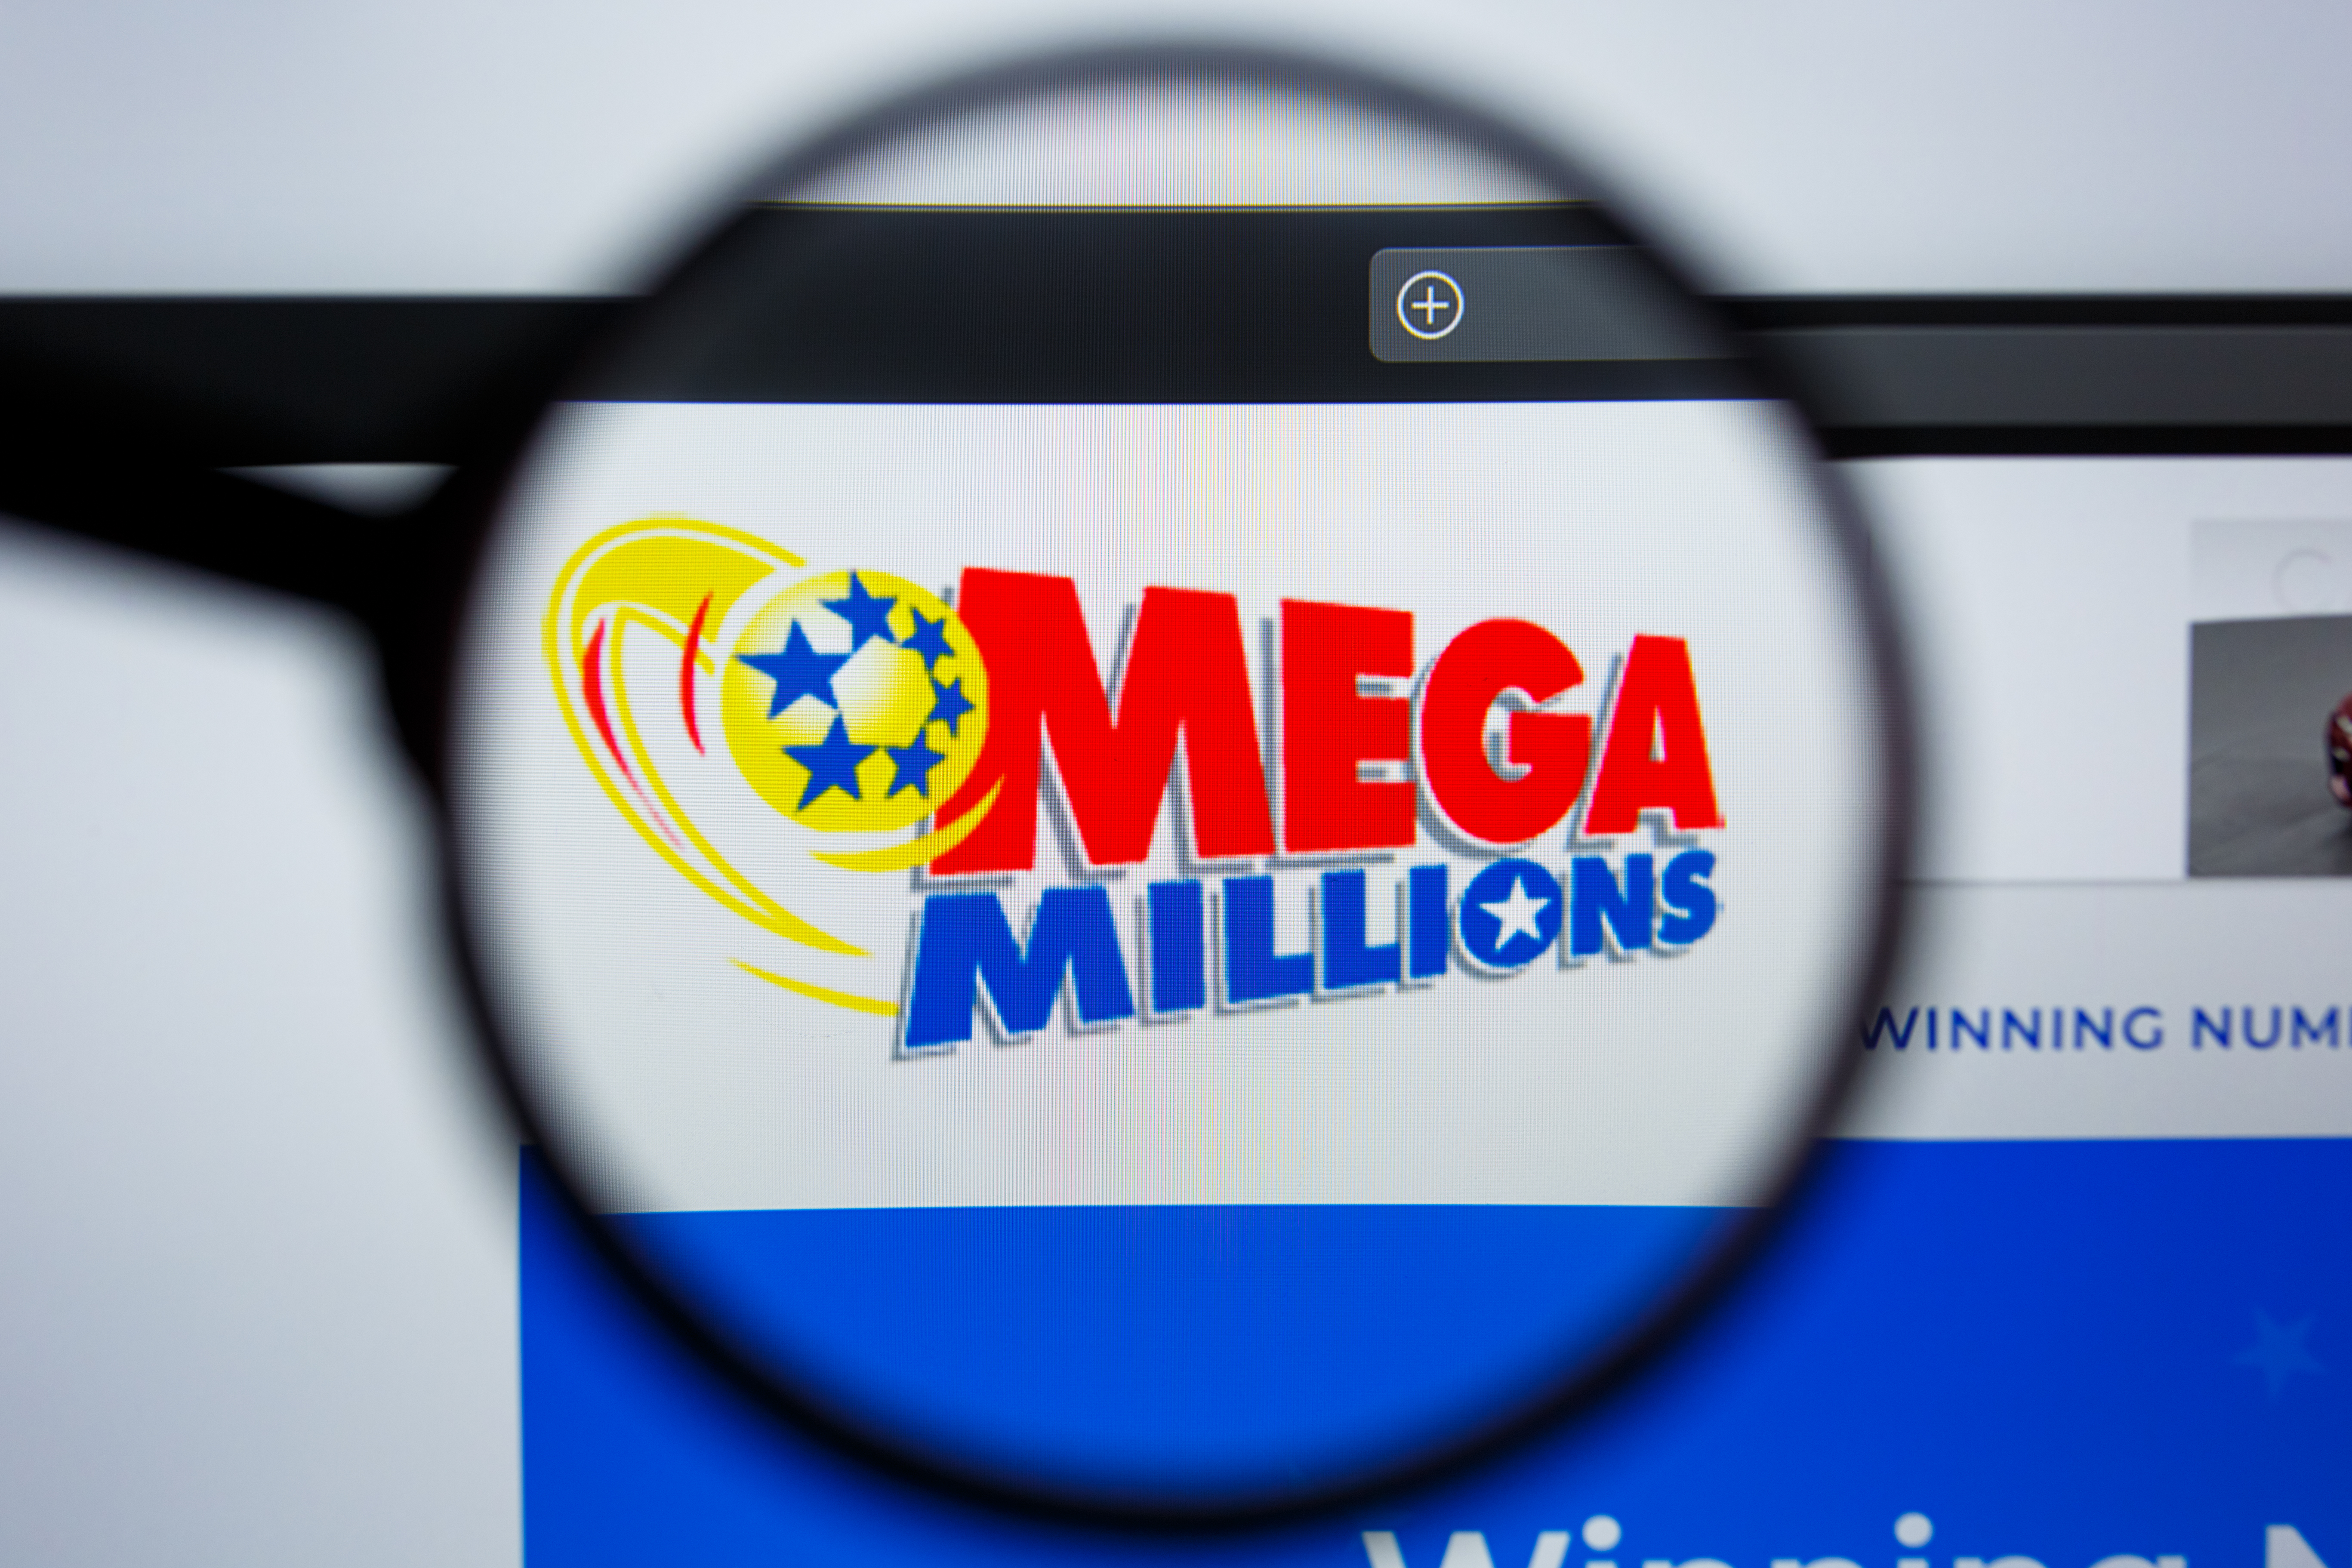 Live Mega Millions: Results and Winners for Friday, December 2, 2022